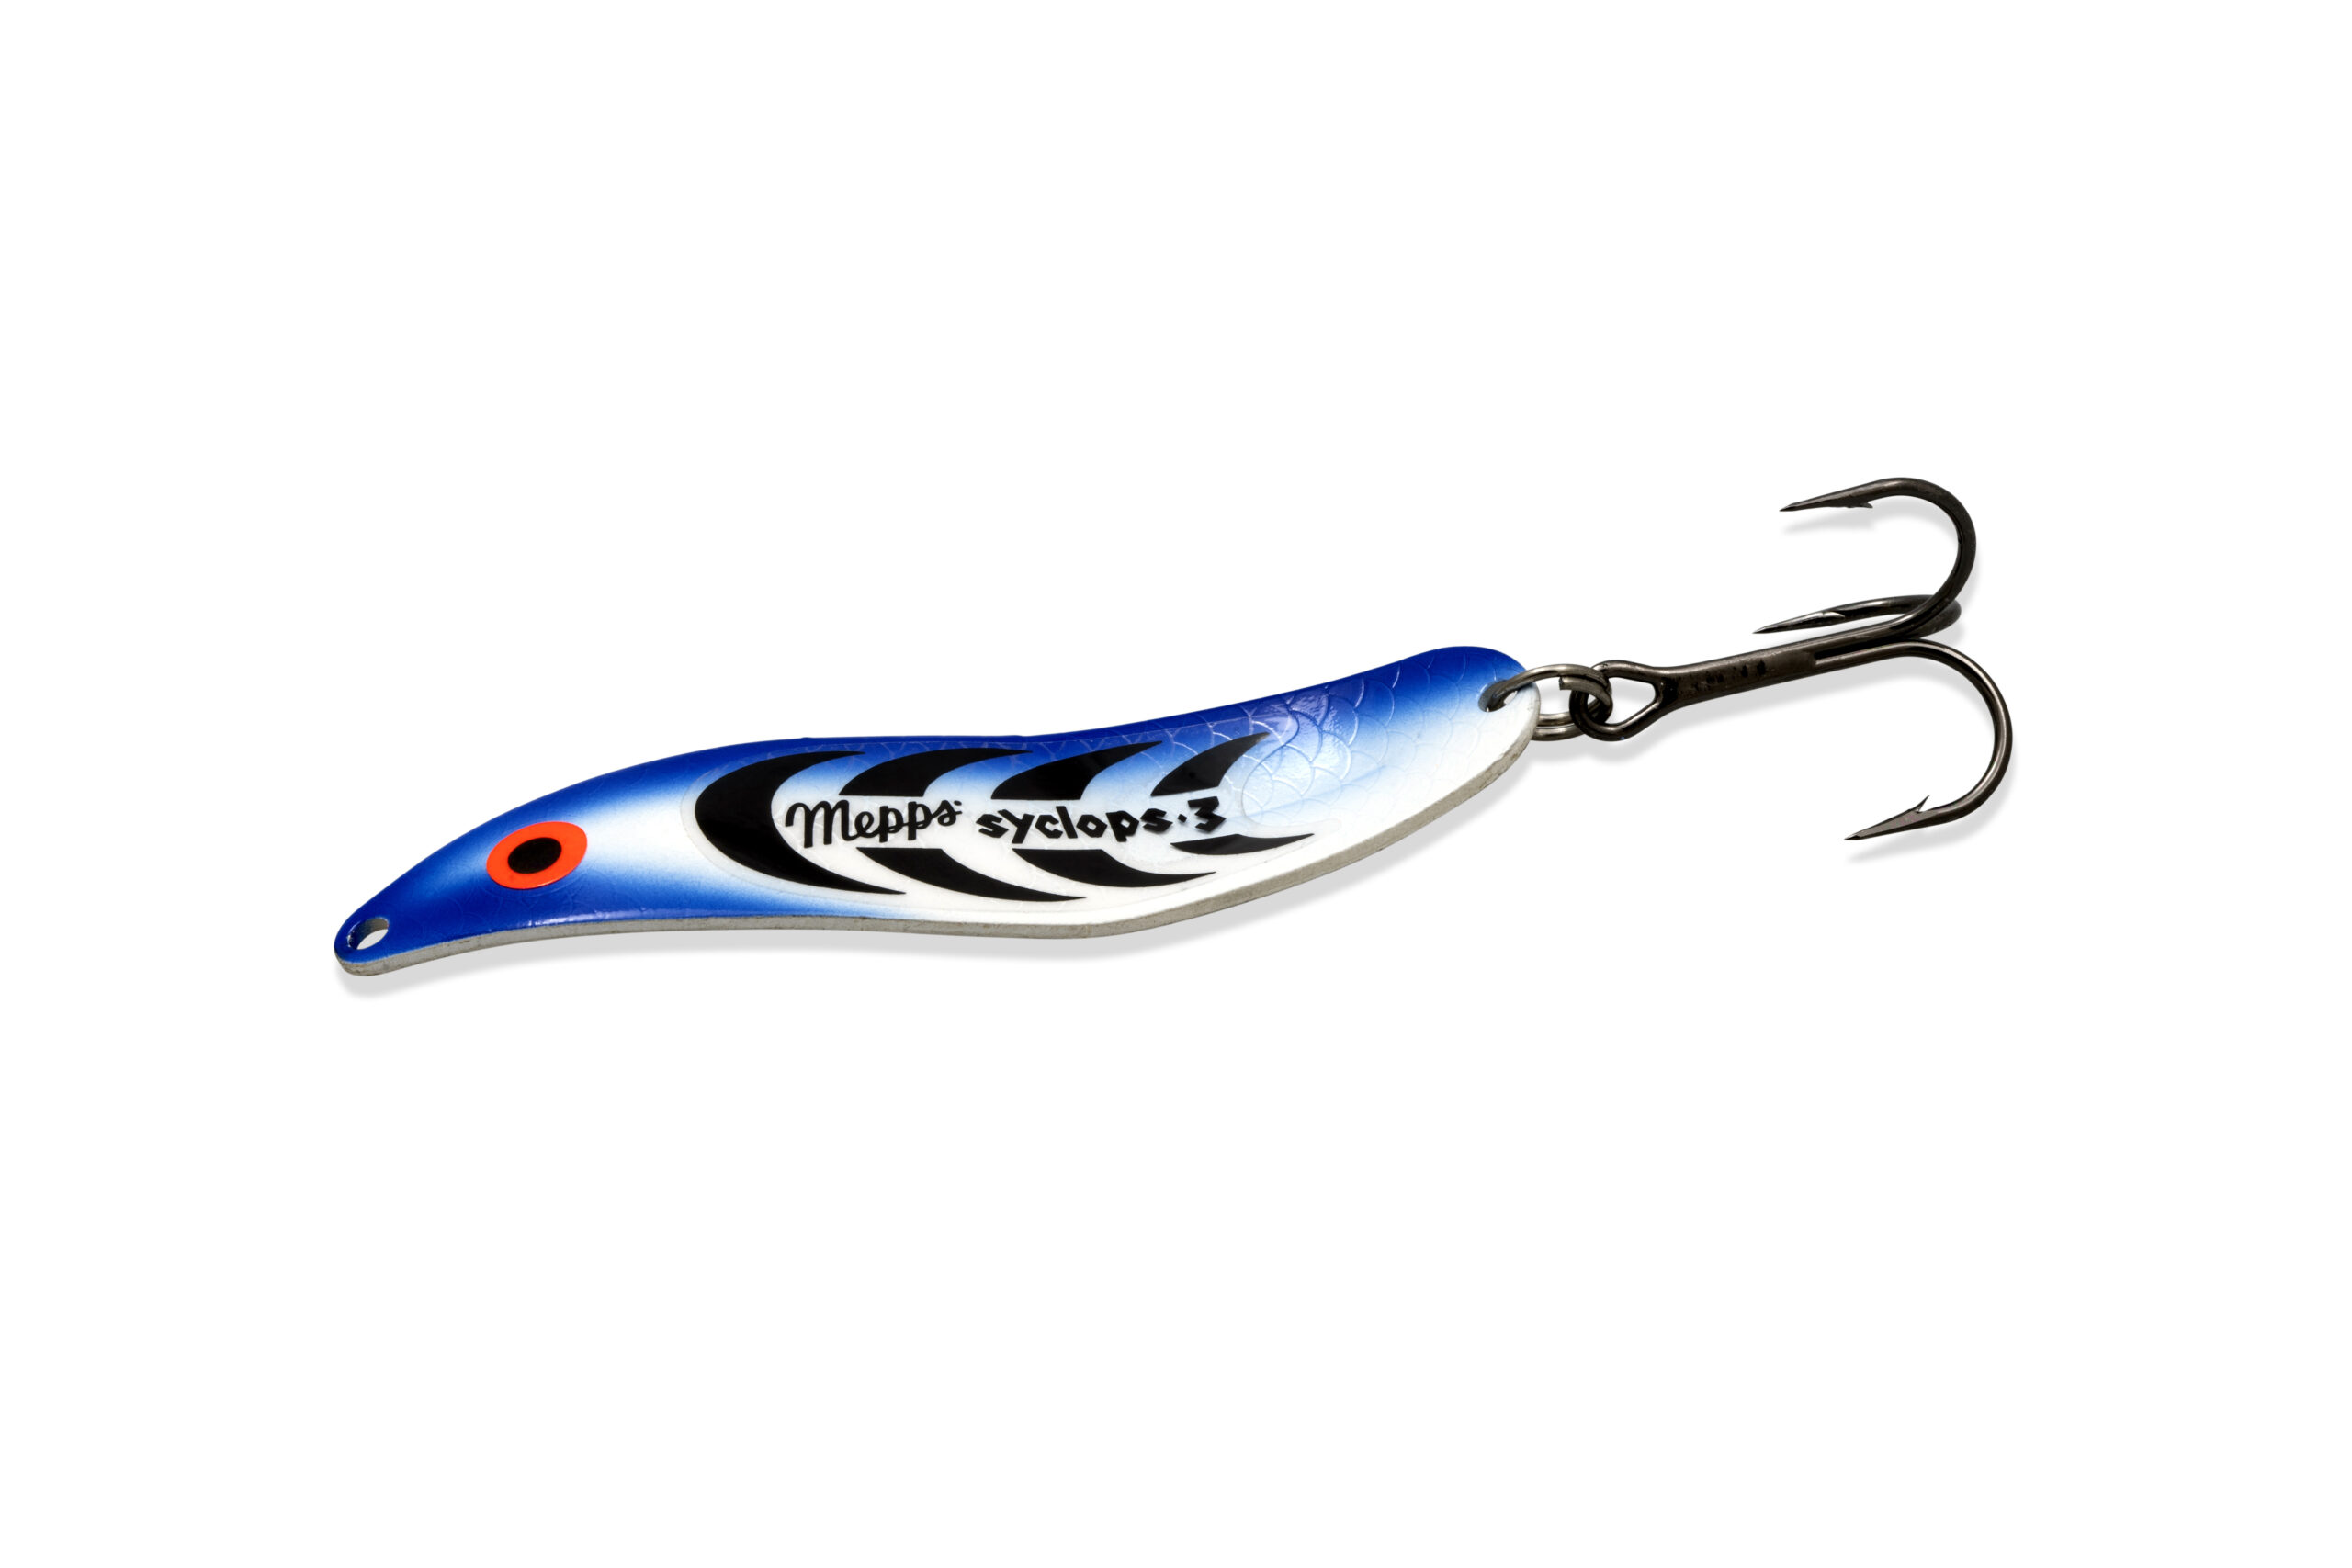 Mepps cyclops 1 spoon lure 12g marked S Gold Black (5)